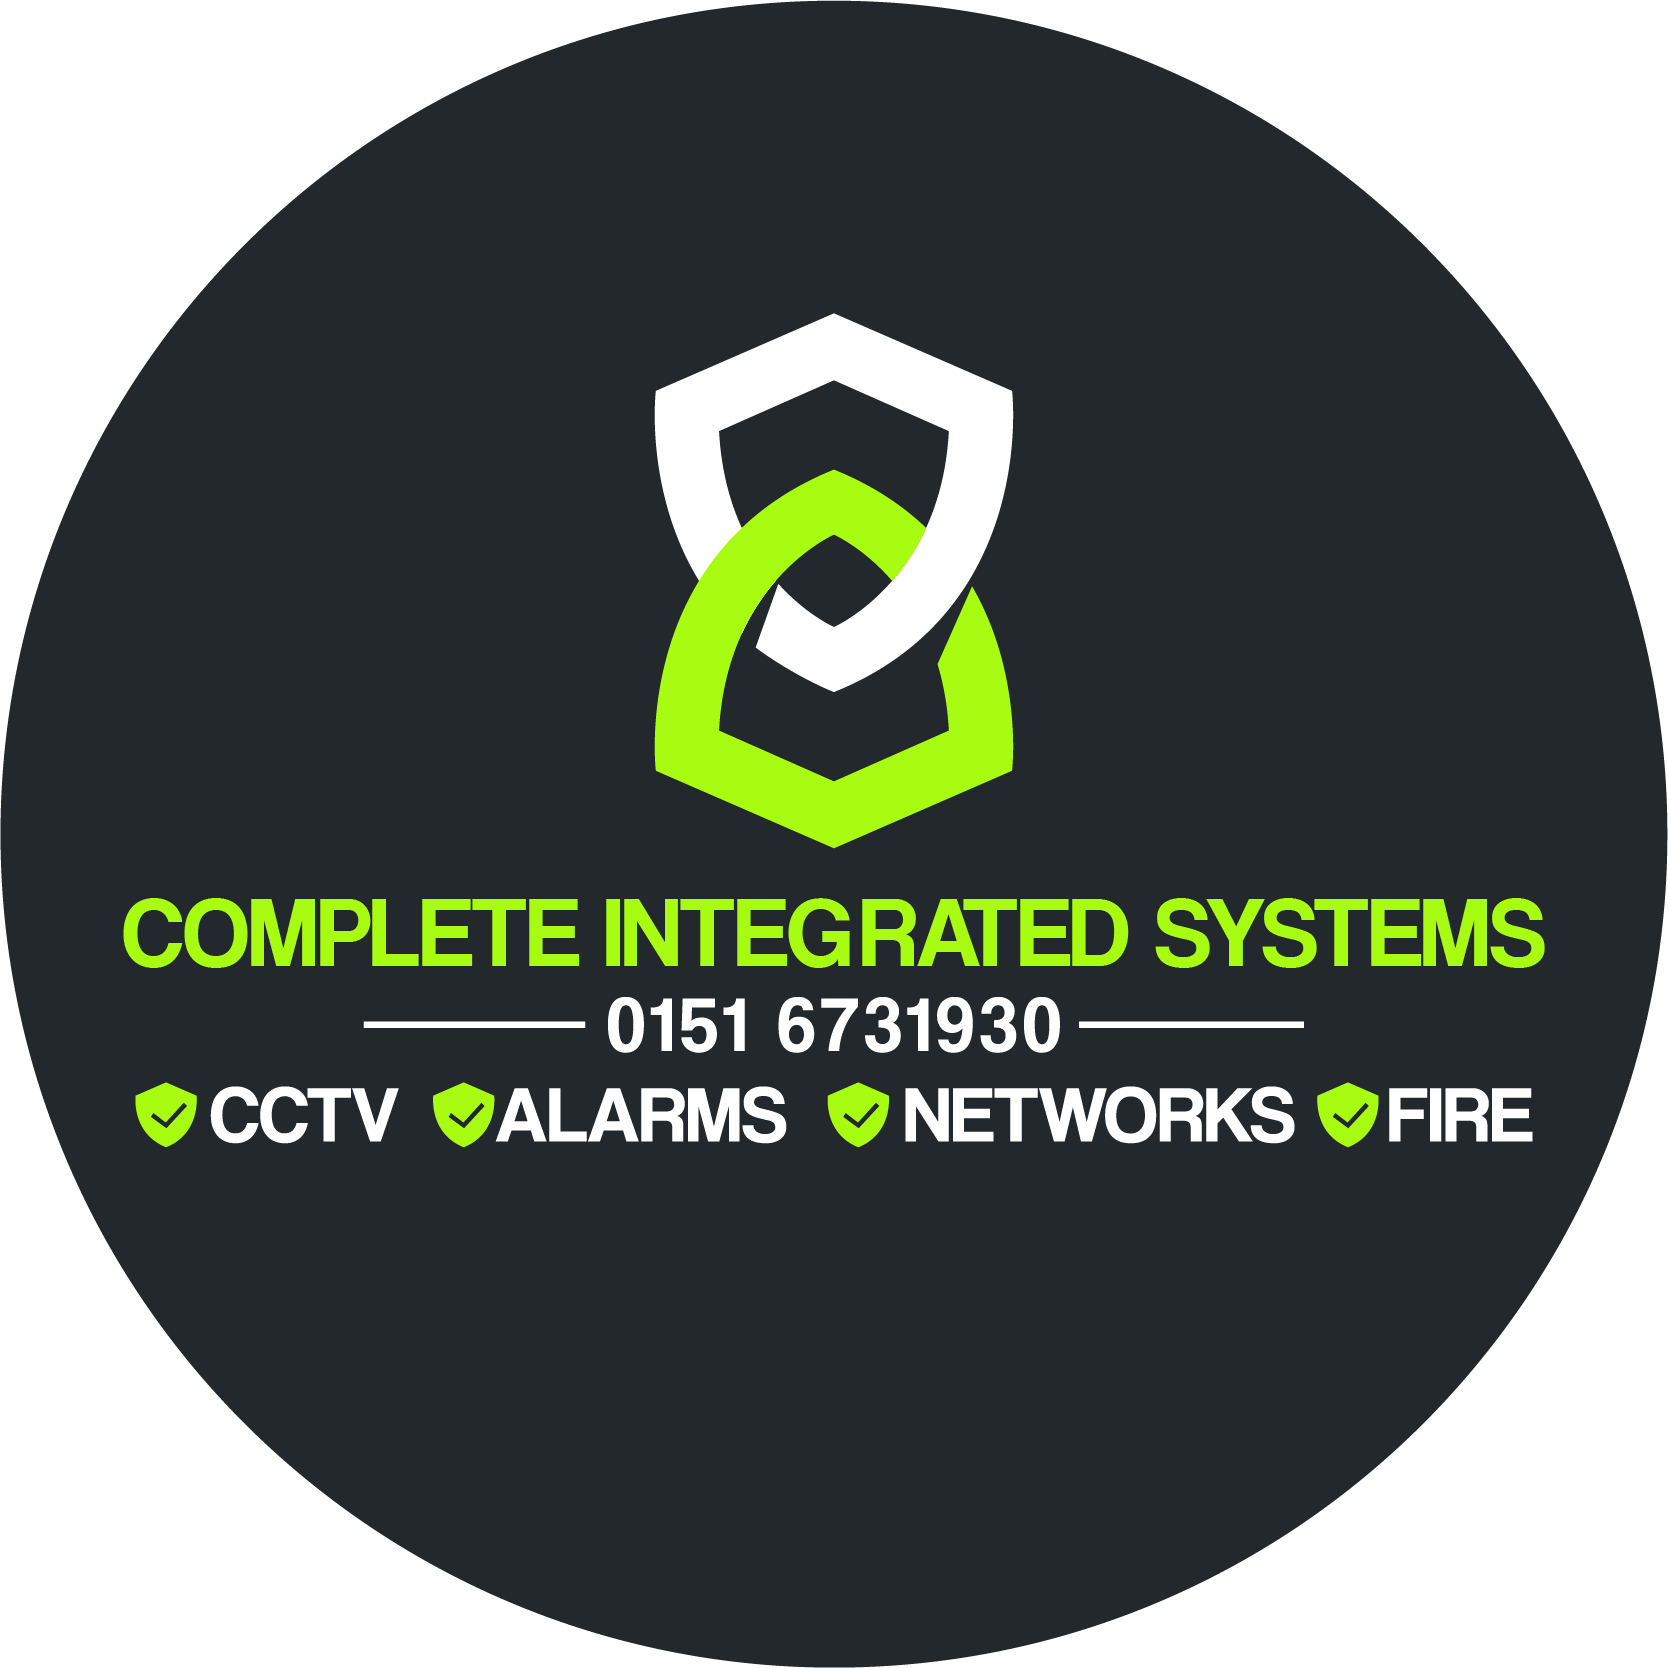 Complete Integrated Systems